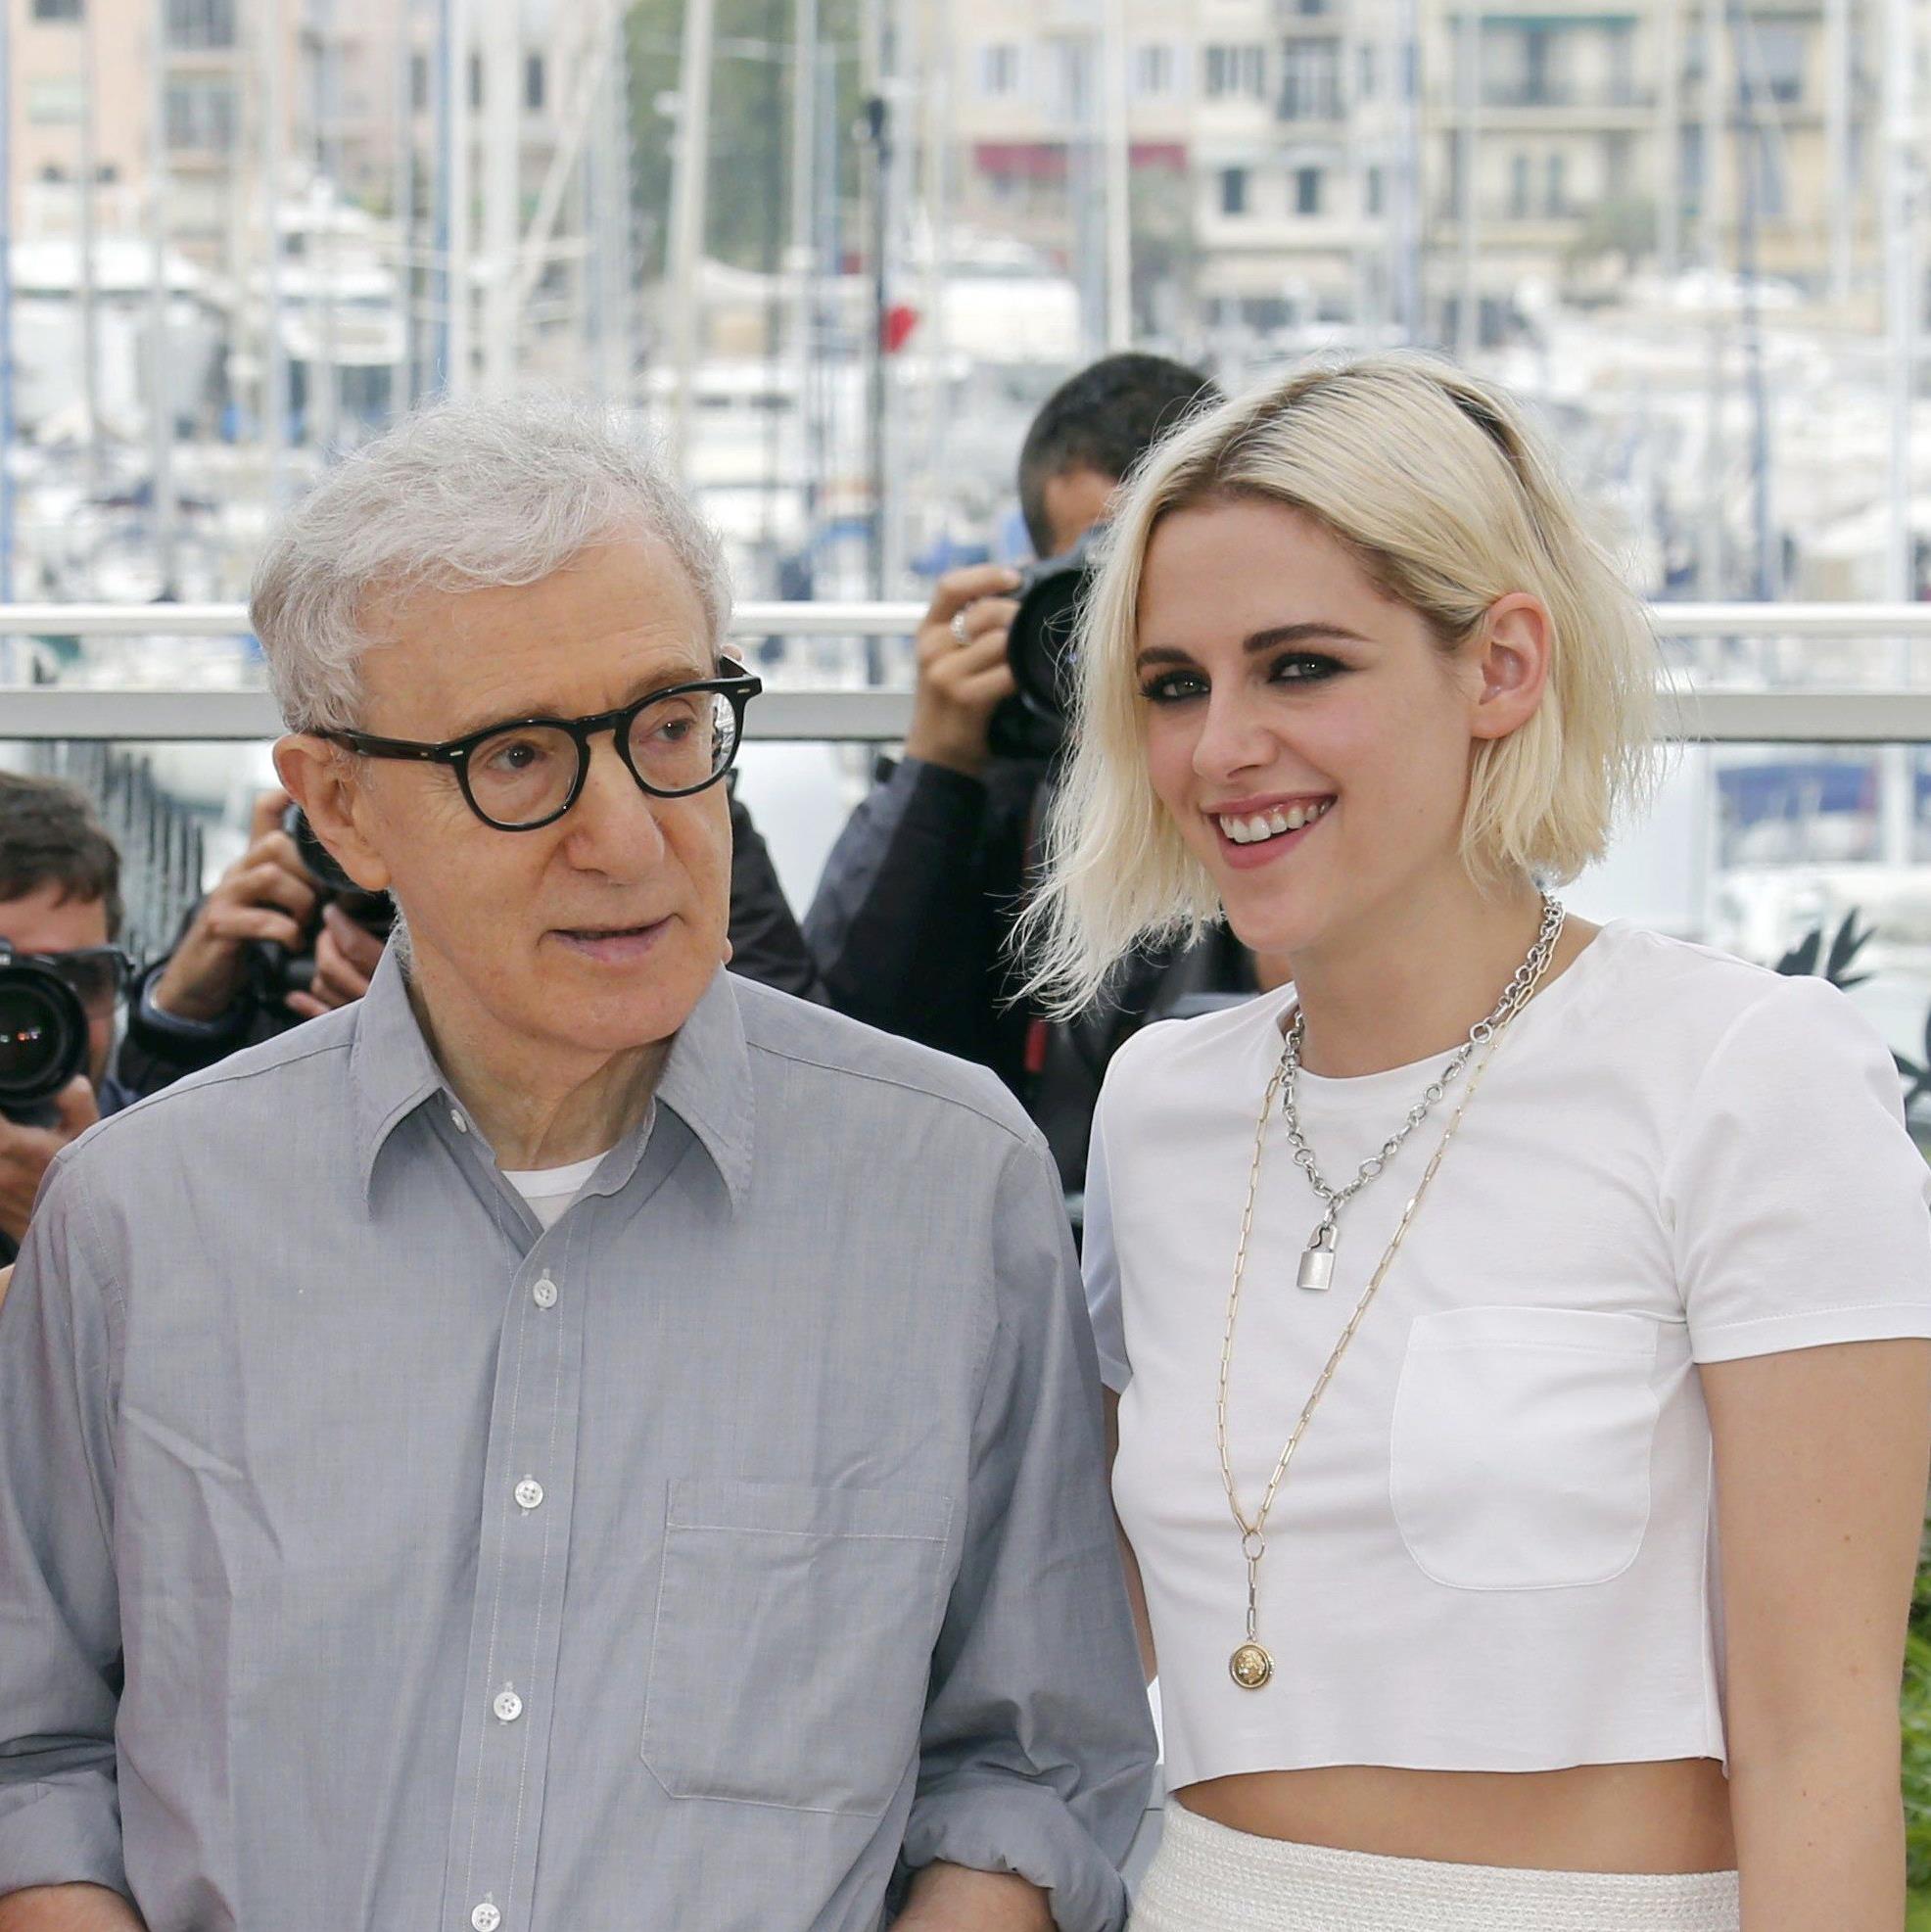 Actress Blake Lively jokes with director Woody Allen and actress Kristen Stewart as they pose during a photocall for the film 